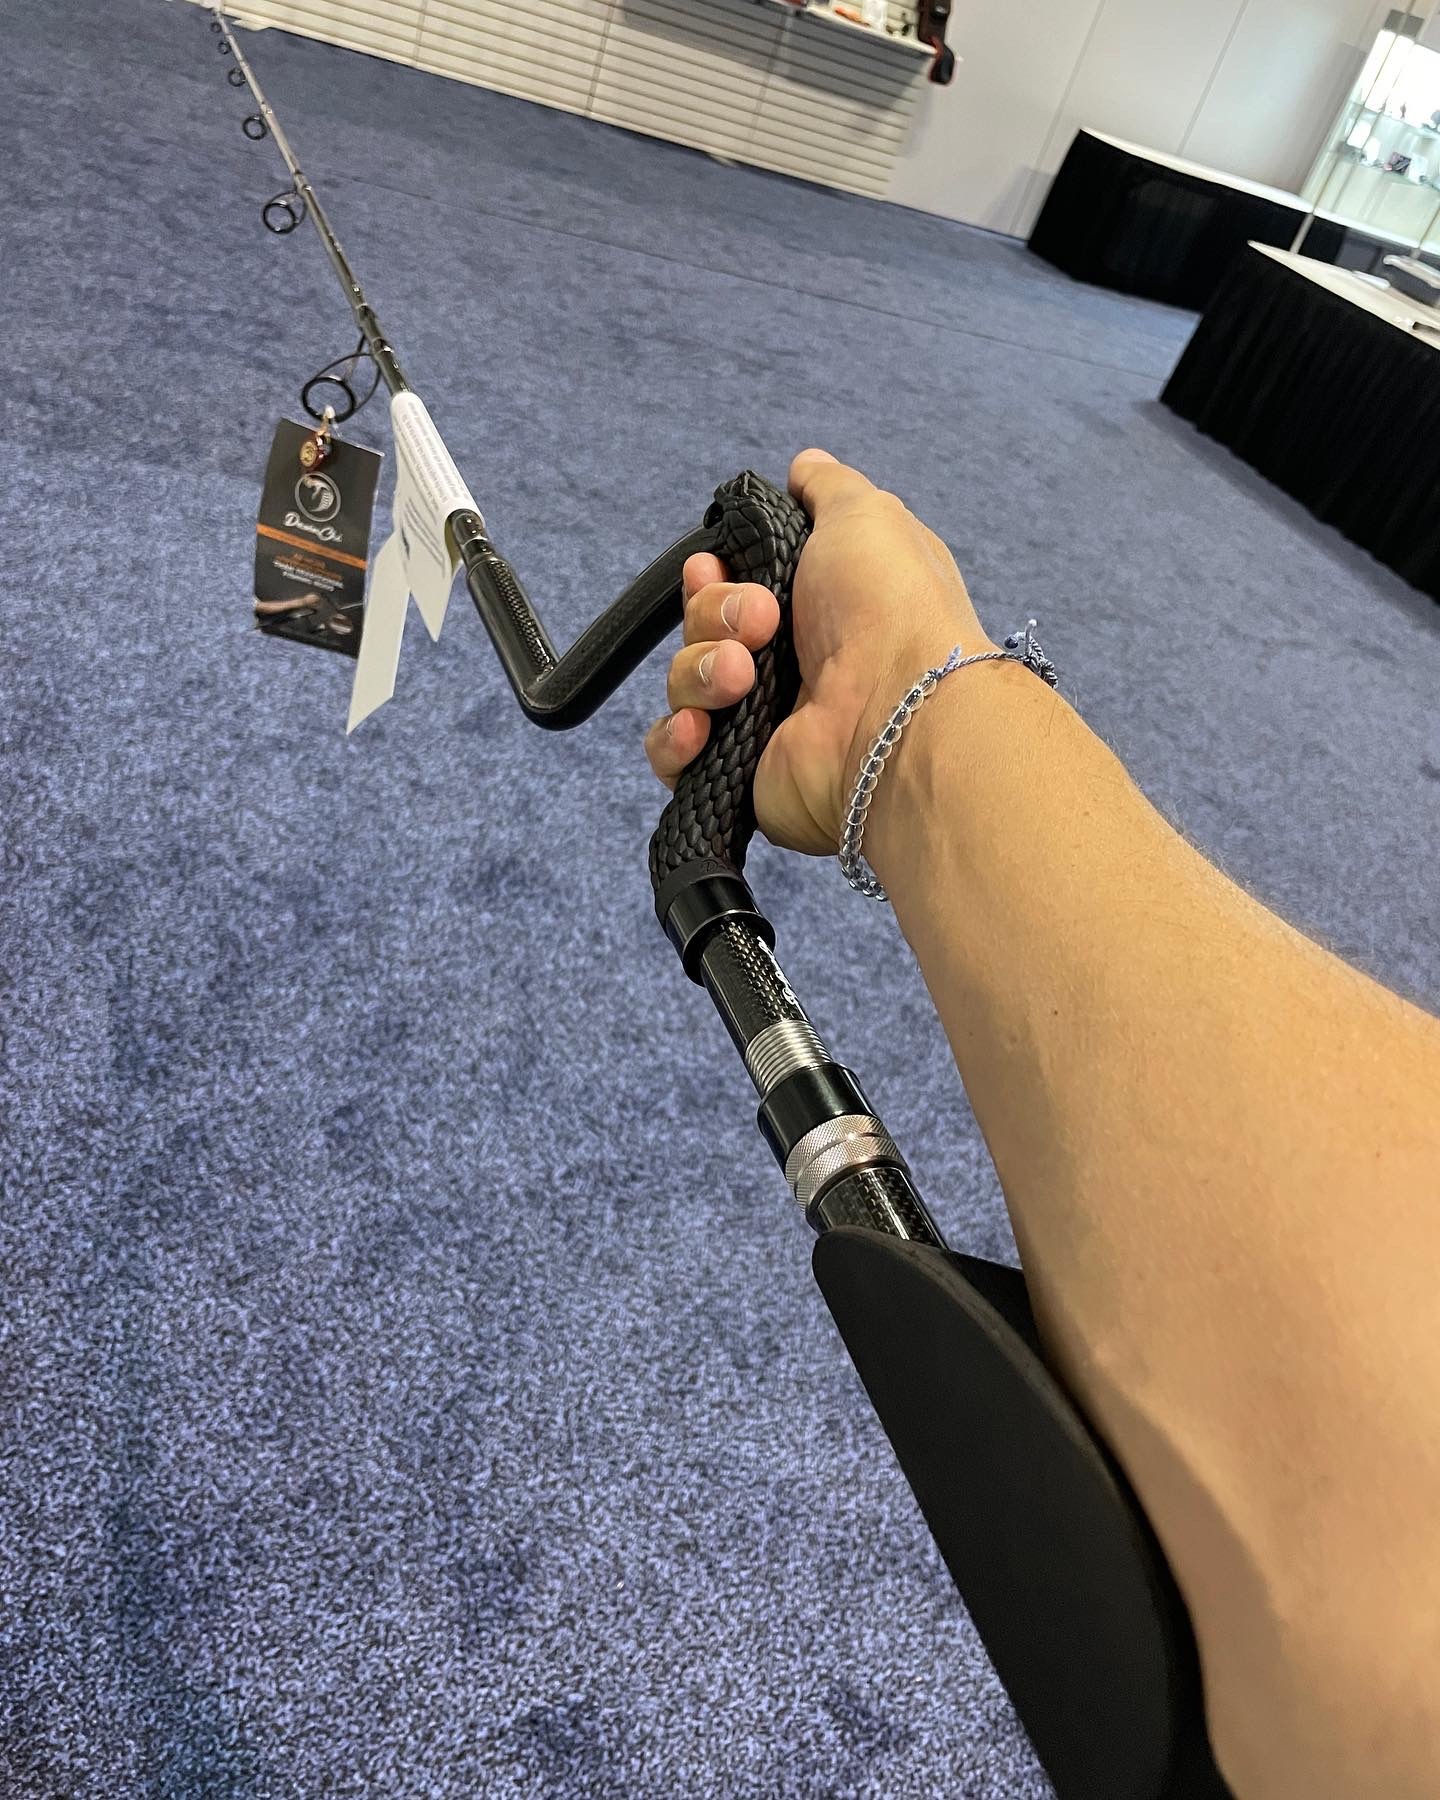 Quirky, and ridiculous looking with the snake head handle, but the ergonomic shape and arm support would make for much quicker and more powerful hook sets when bottom fishing.